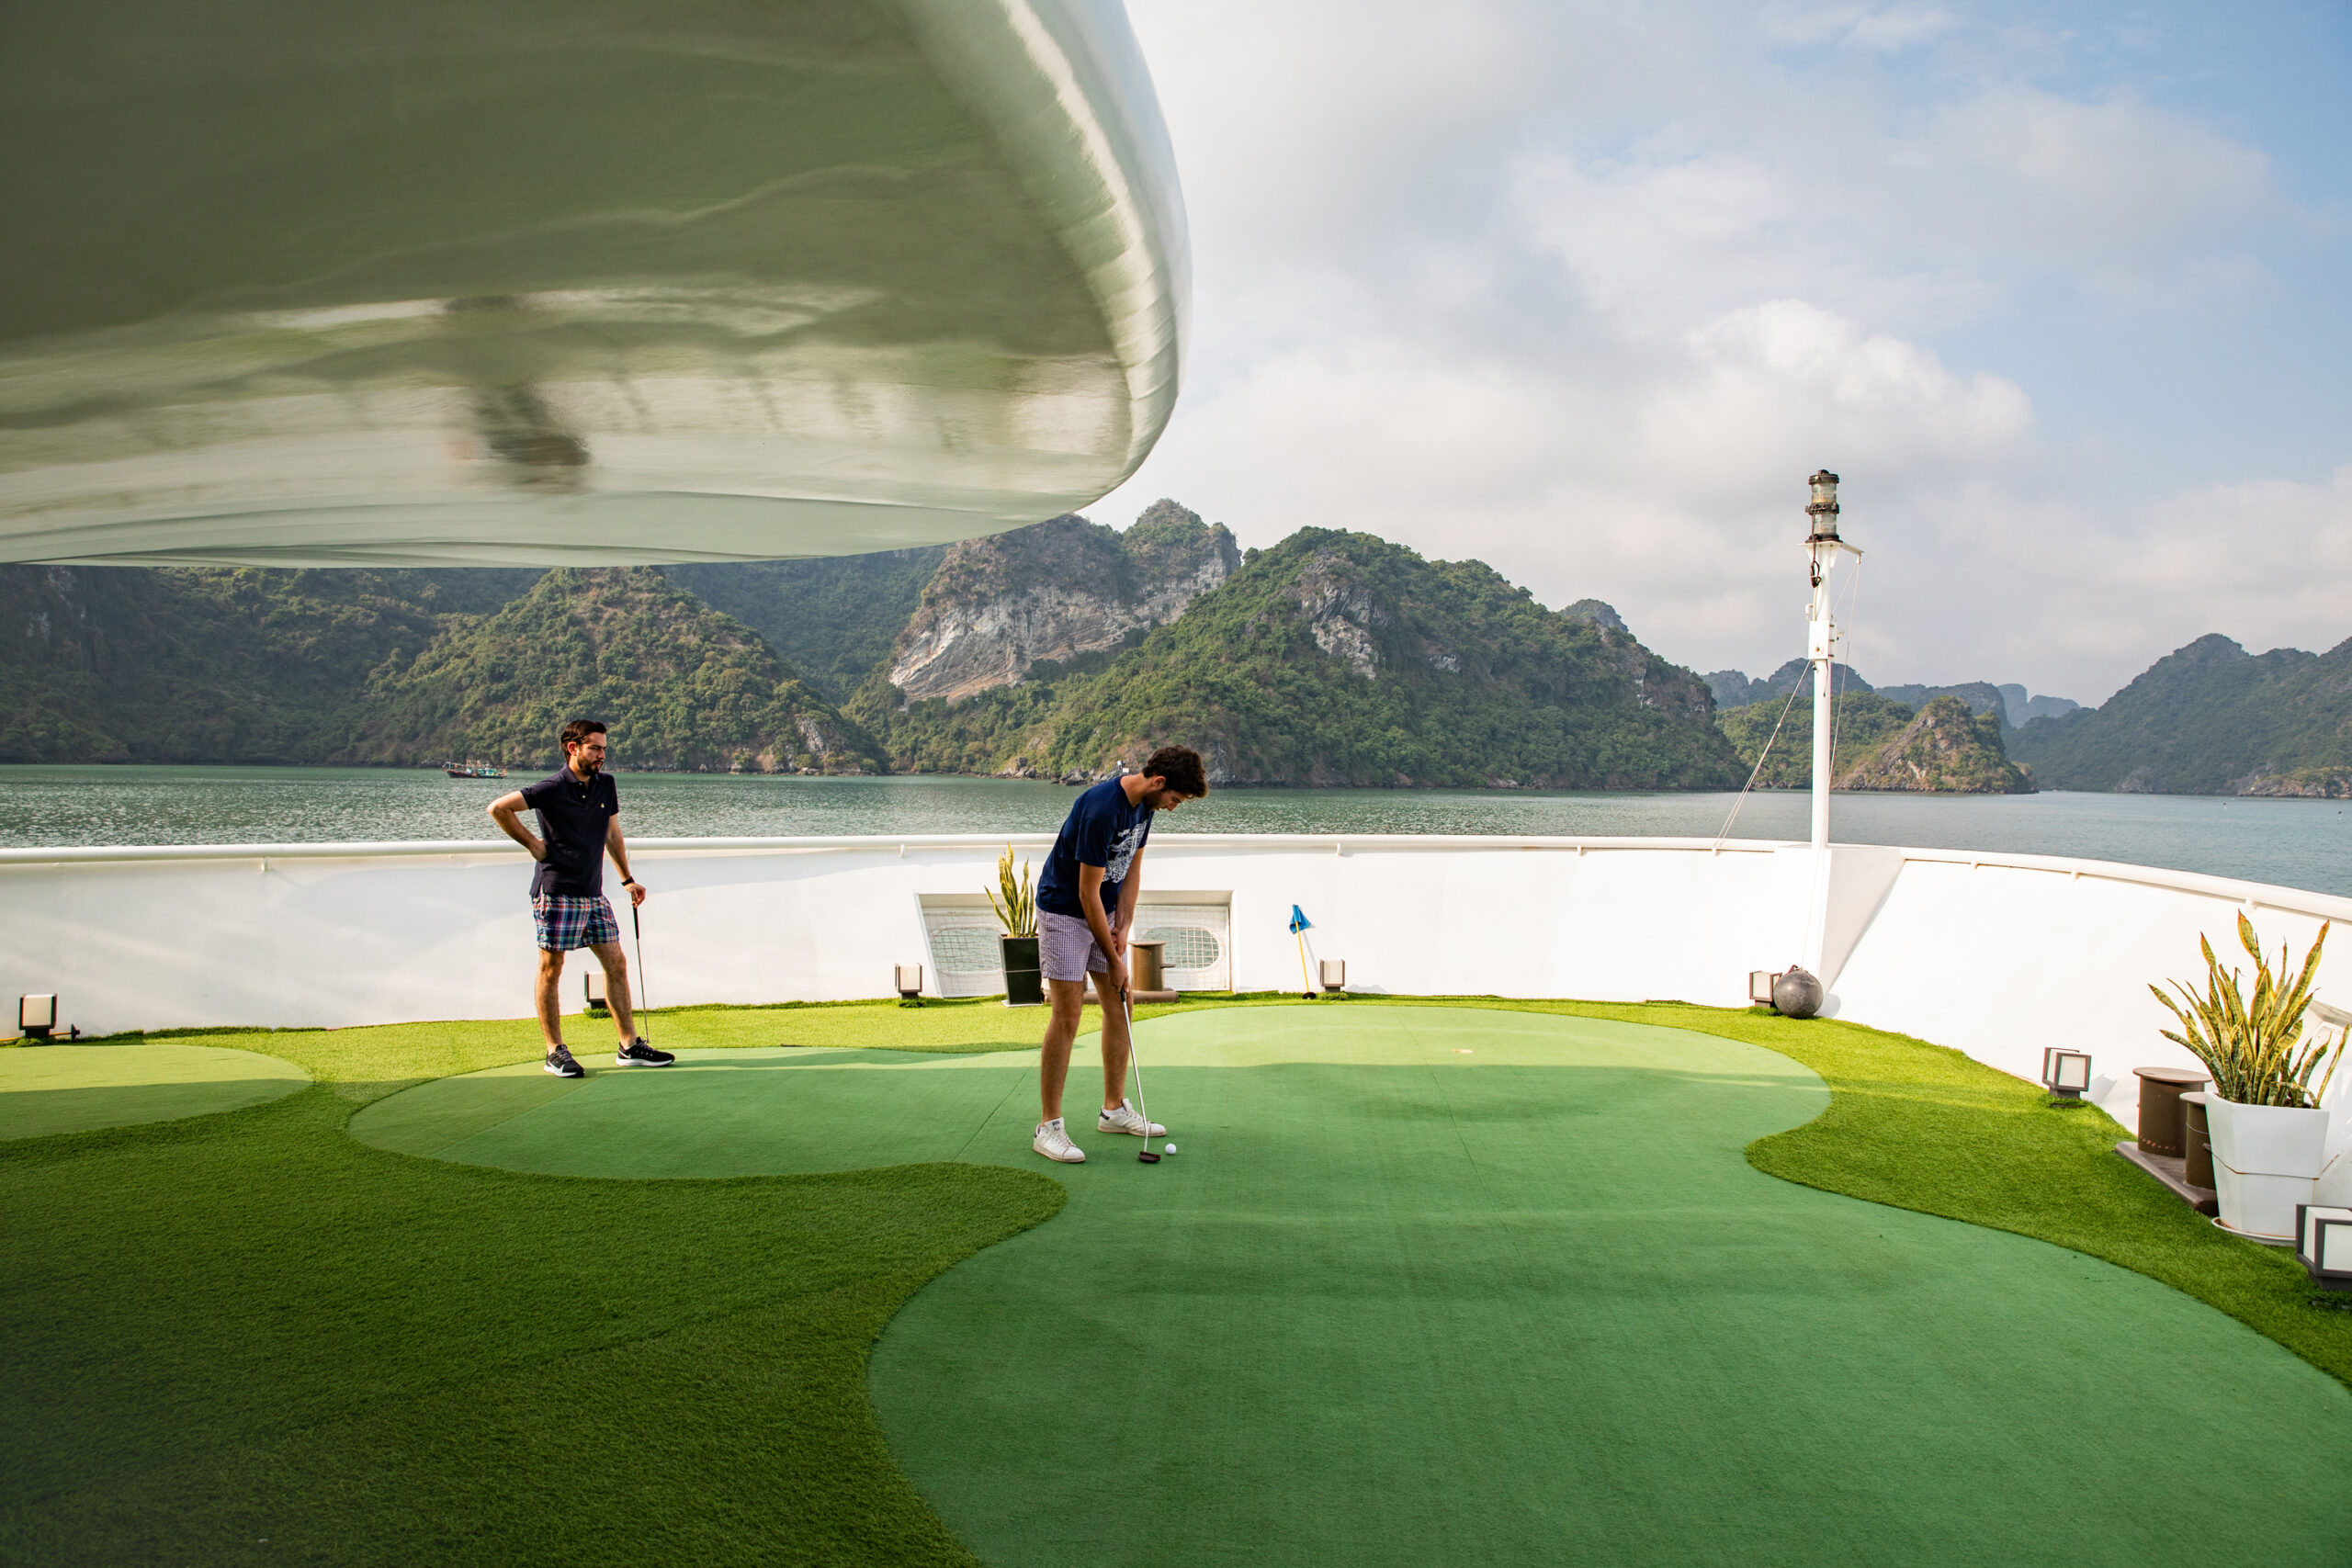 halong bay tours cruises from Hanoi to Halong bay best things to do in Halong Bay Hotels with 1 day trip elite of the seas overnight luxury 5 stars cruises